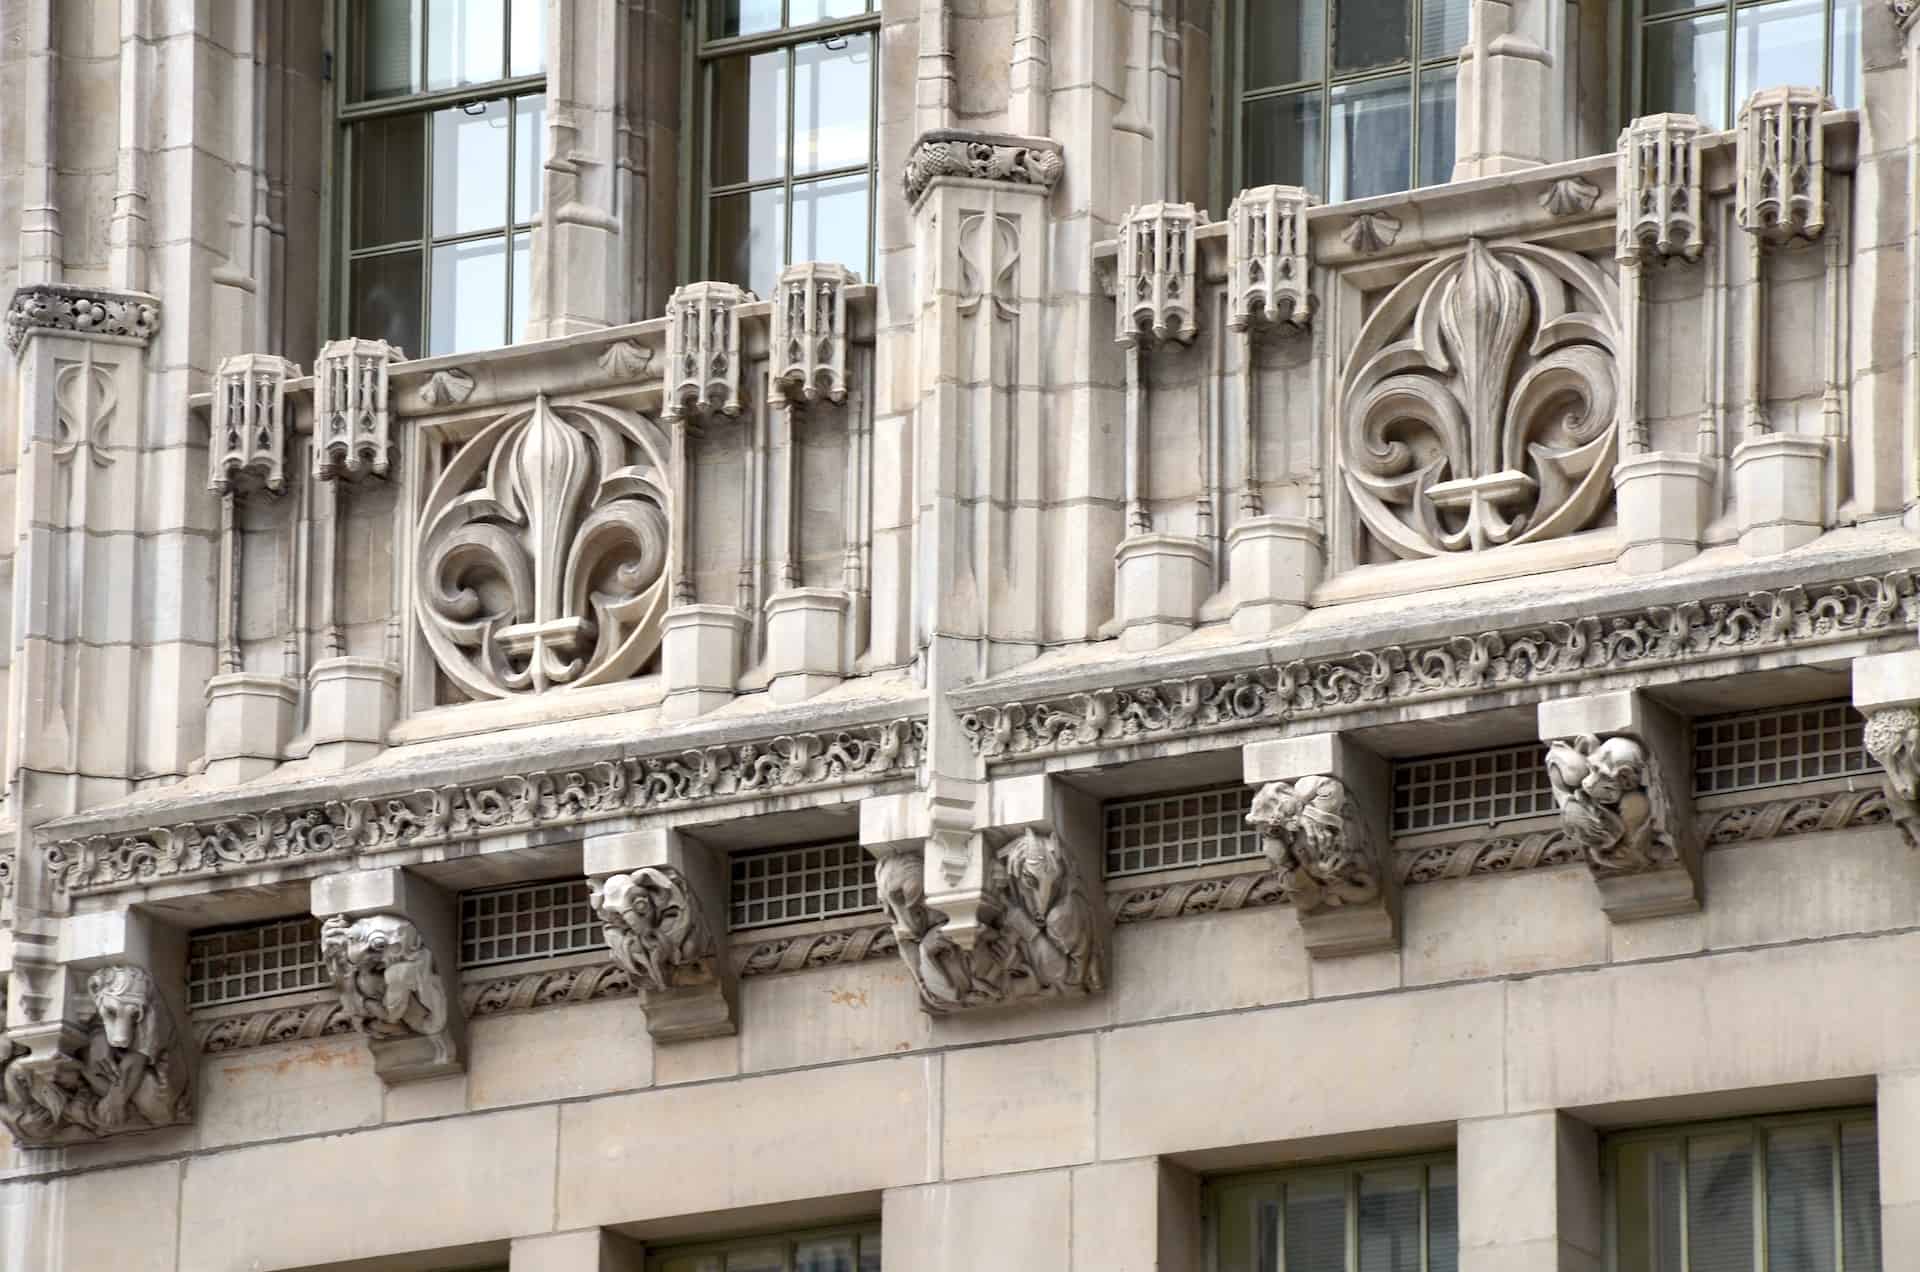 Ornamental stonework on the Tribune Tower along the Magnificent Mile in Chicago, Illinois